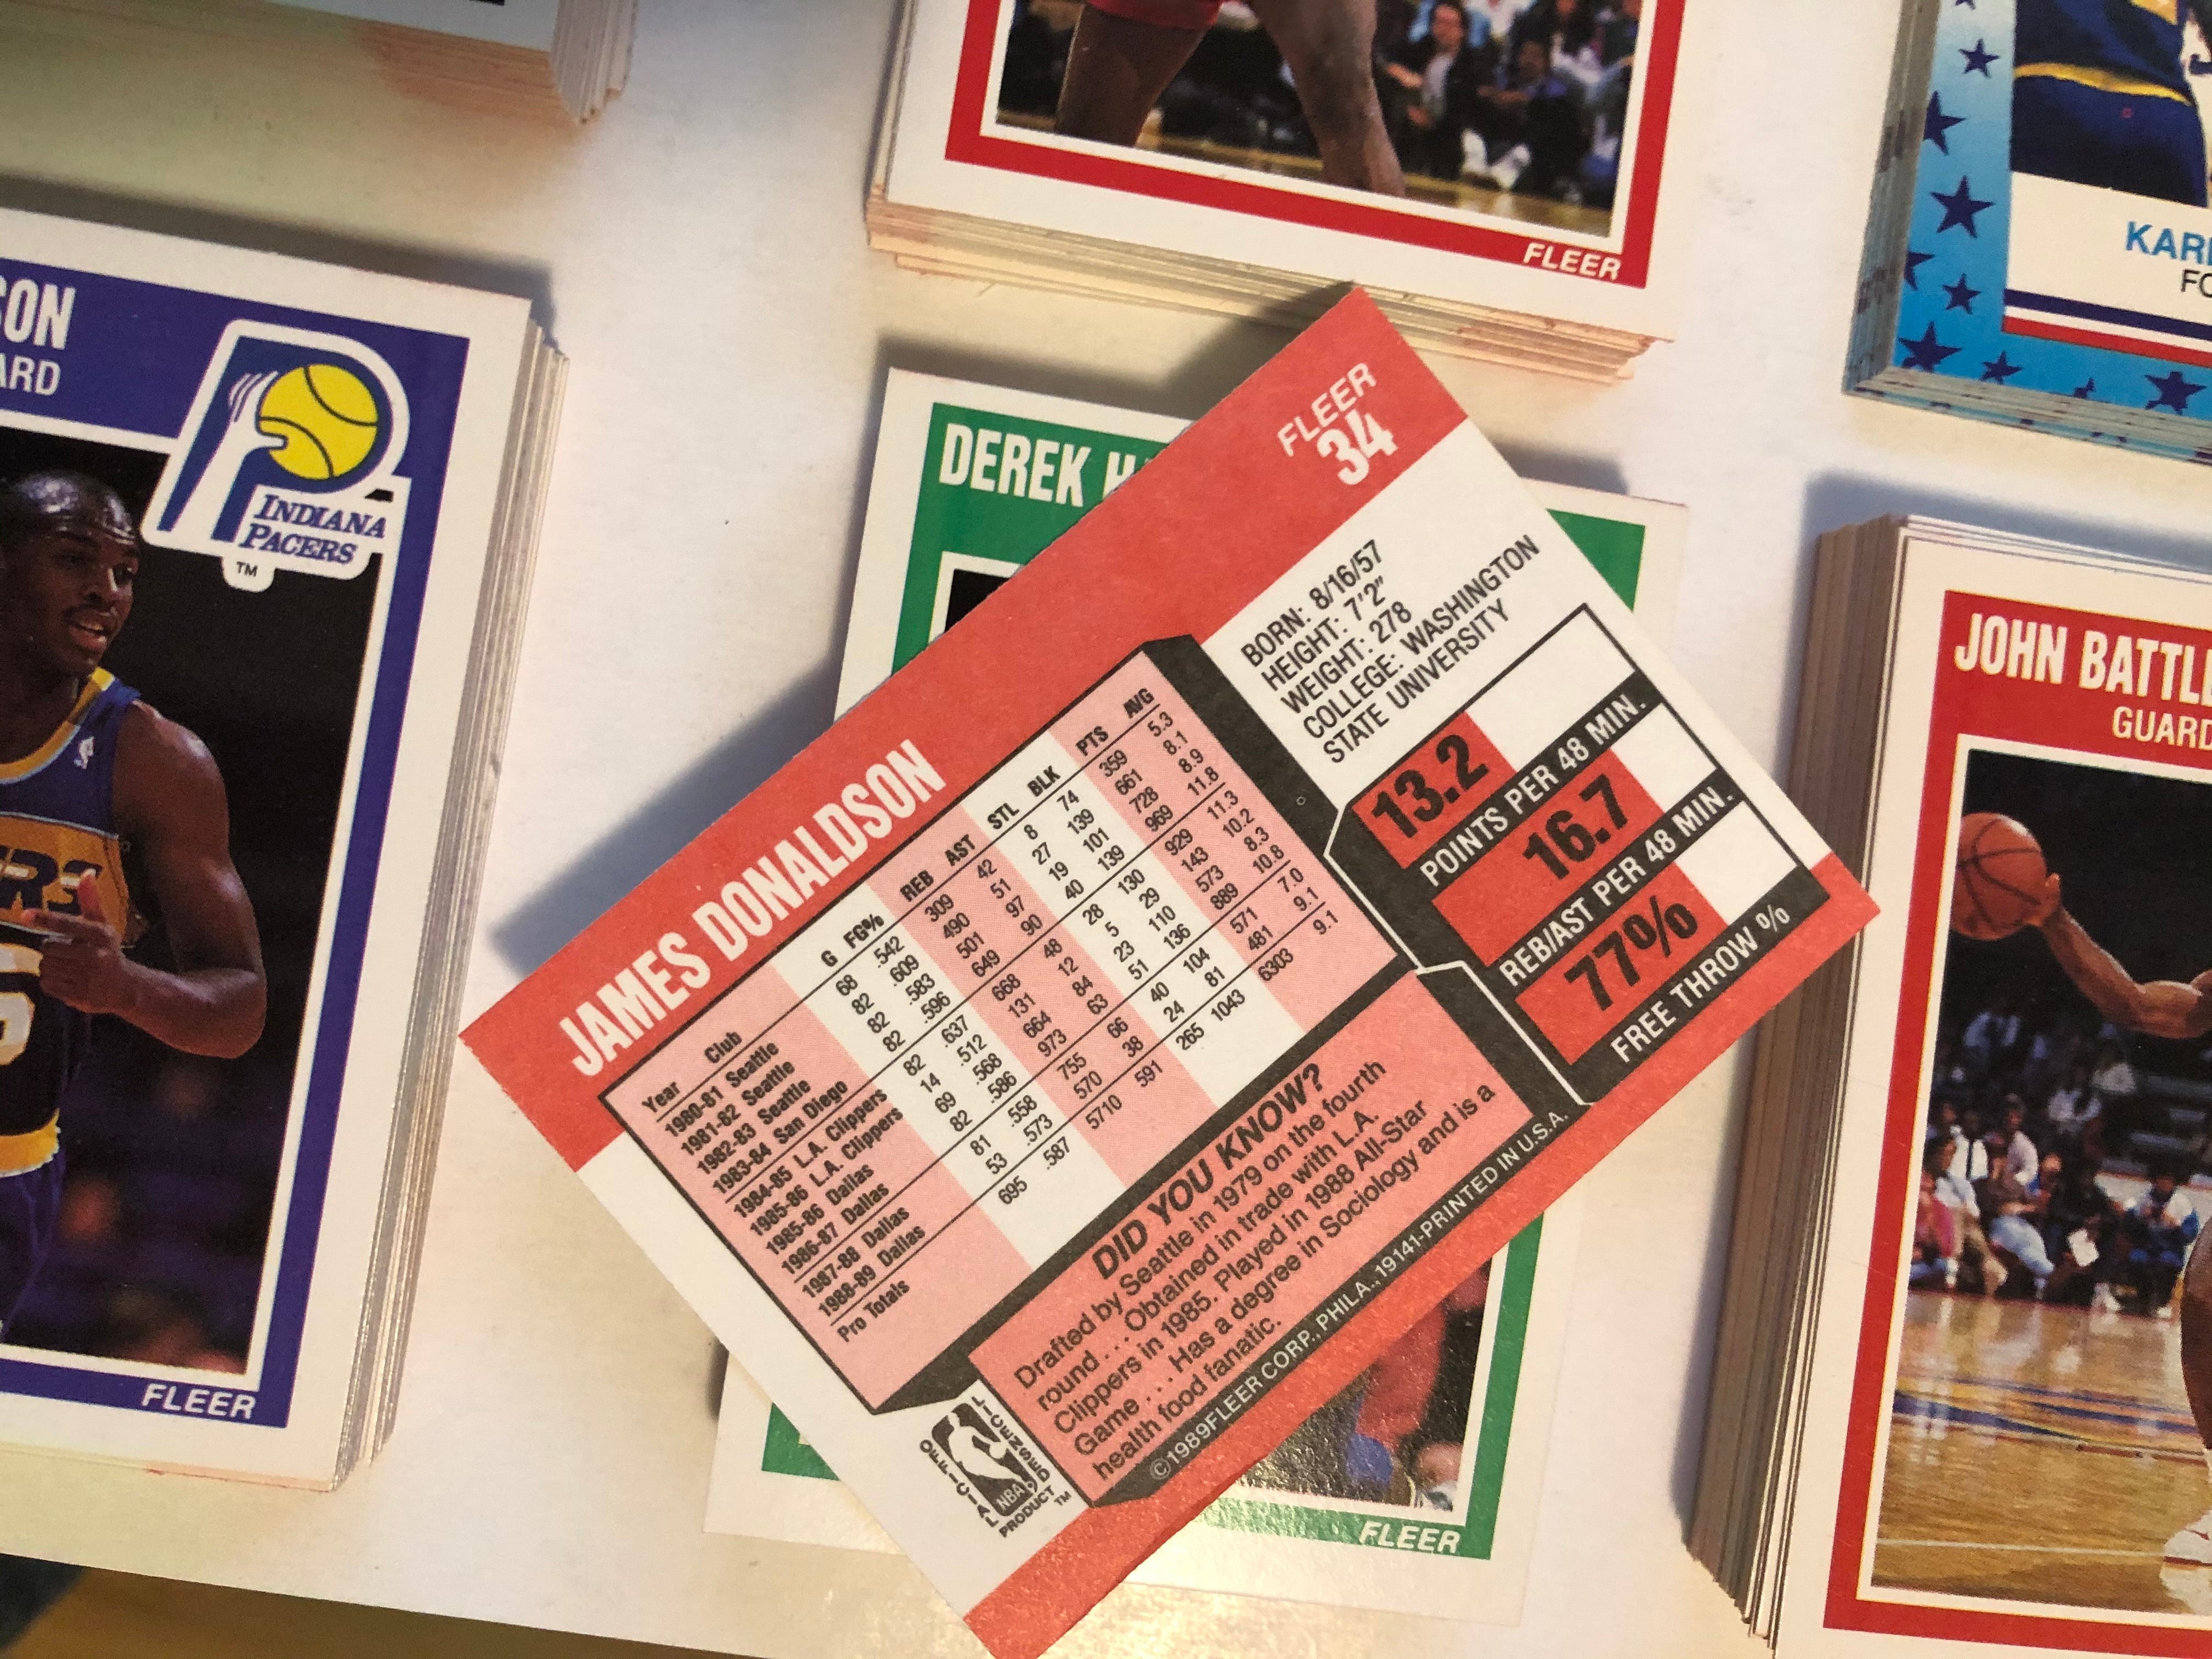 1989 Fleer basketball high grade condition cards and stickers set